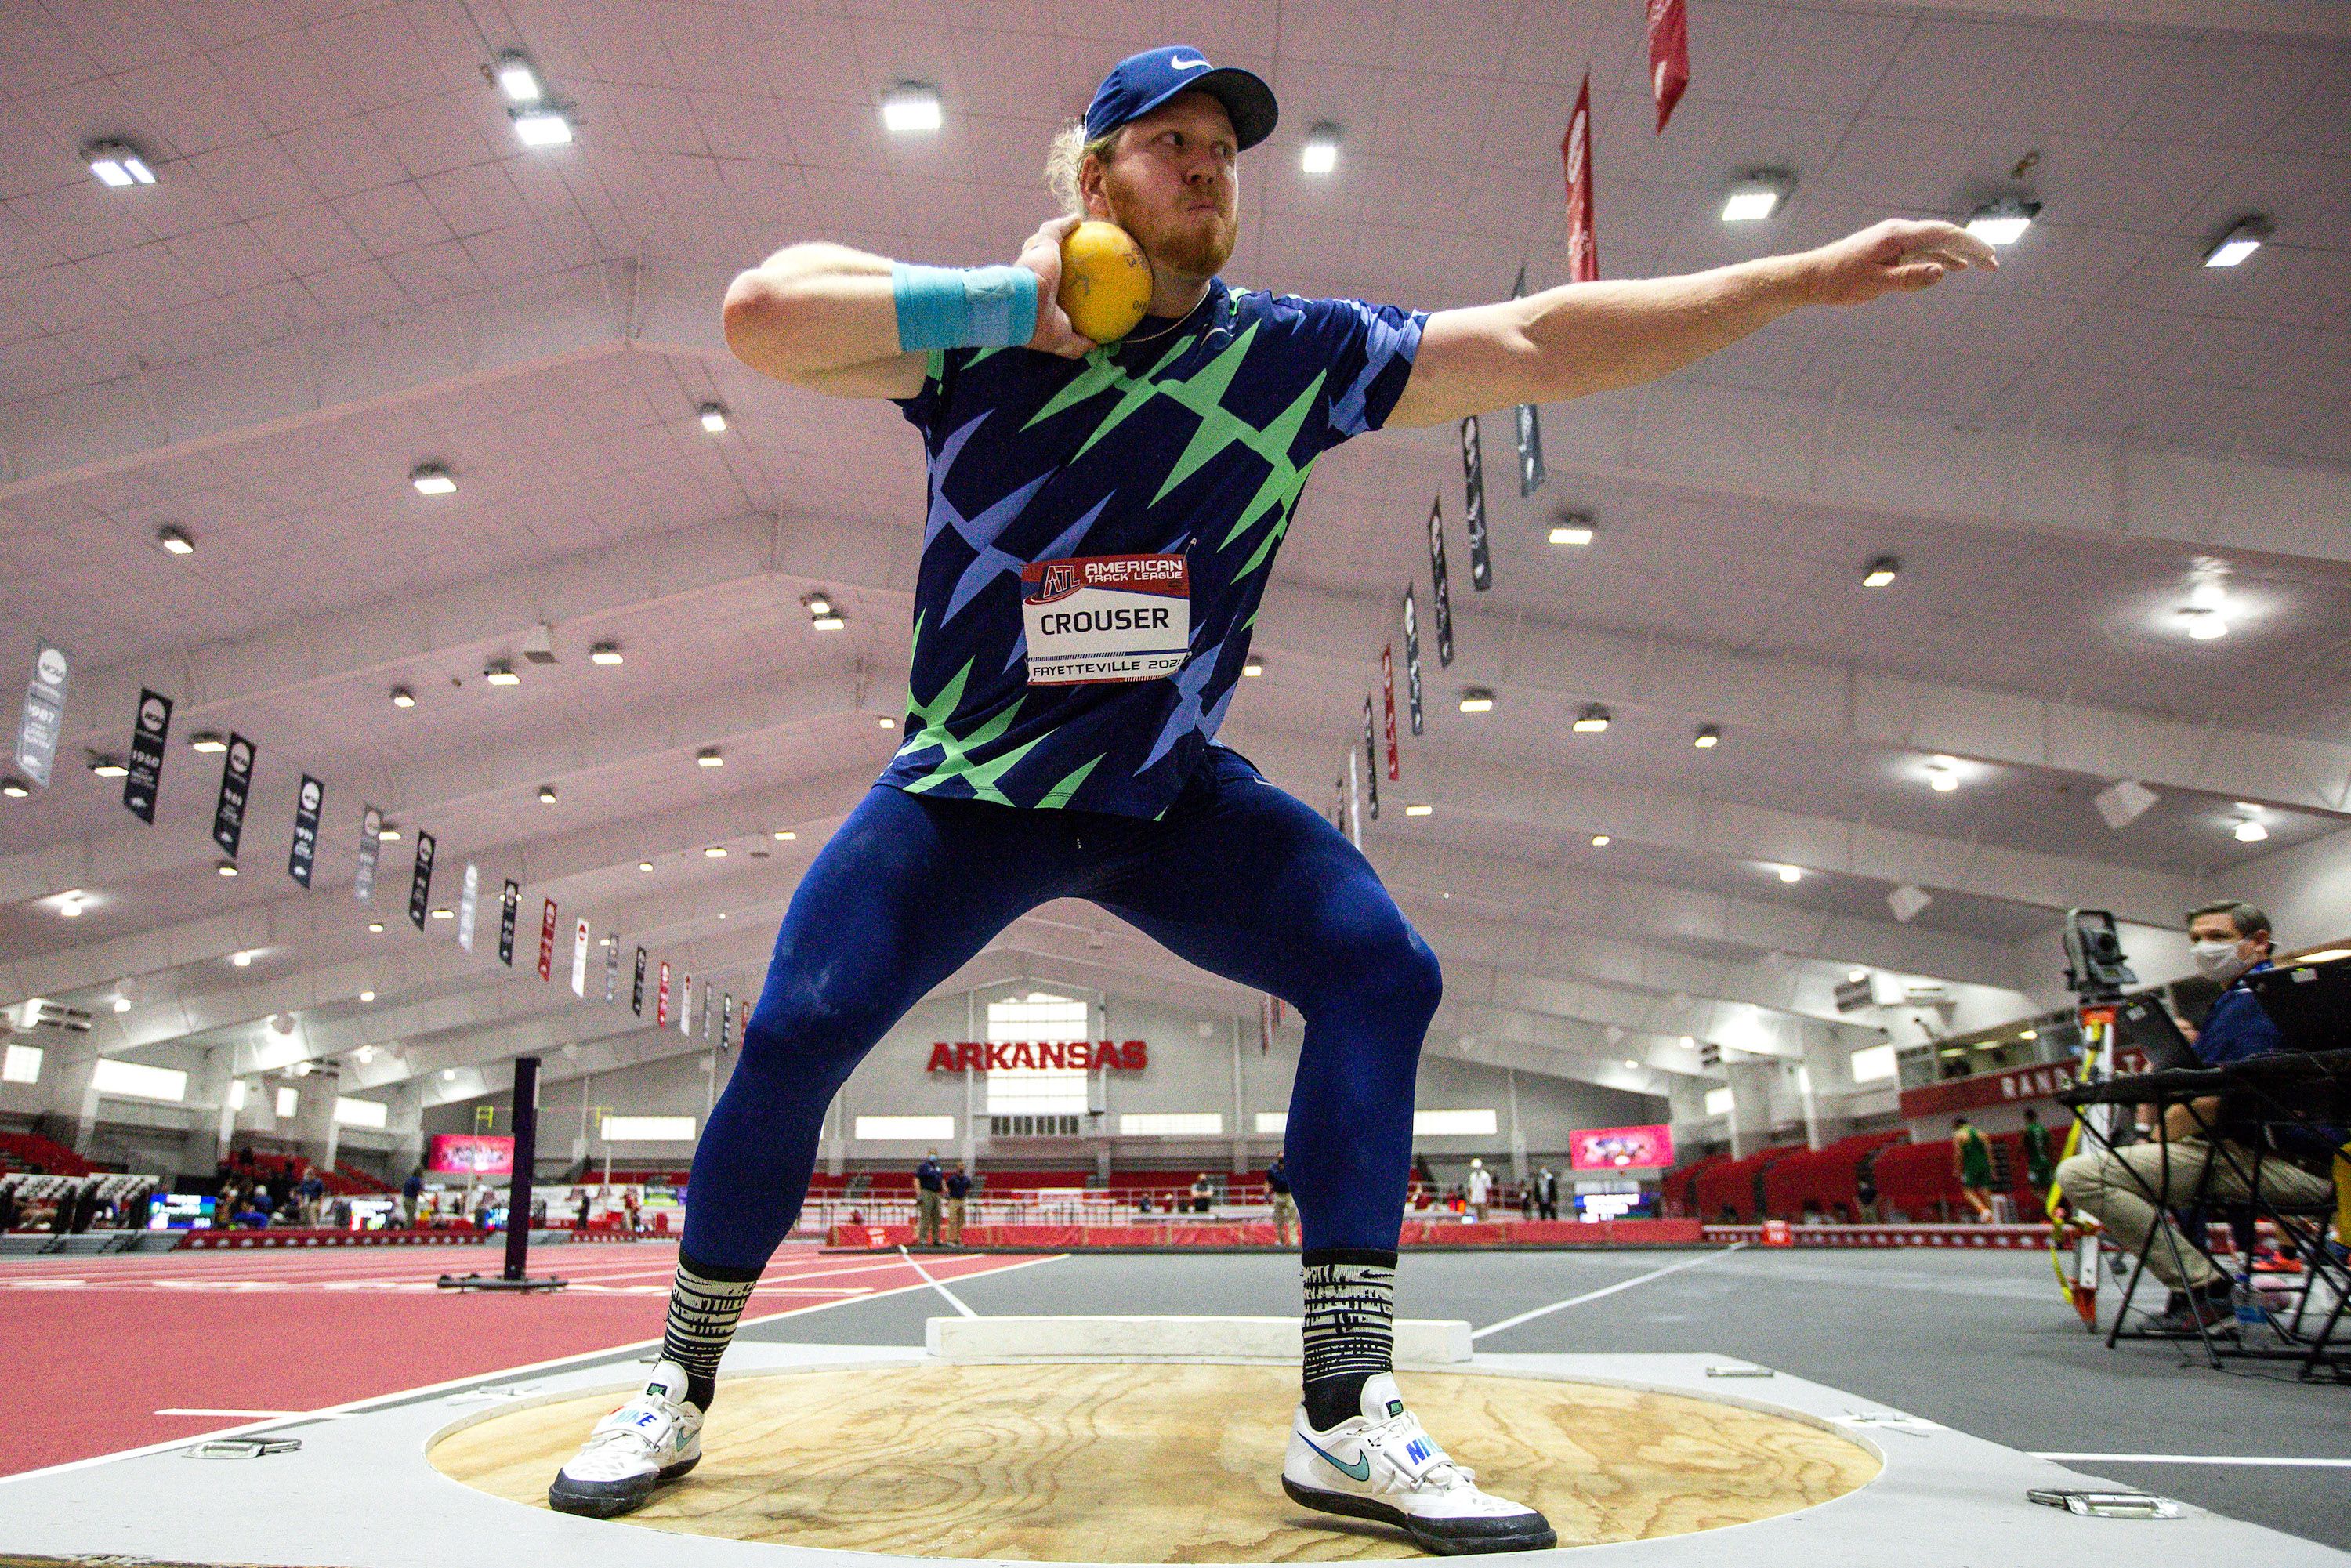 After Smashing World Indoor Record Crouser Sets His Sights On Outdoor Mark News Belgrade 22